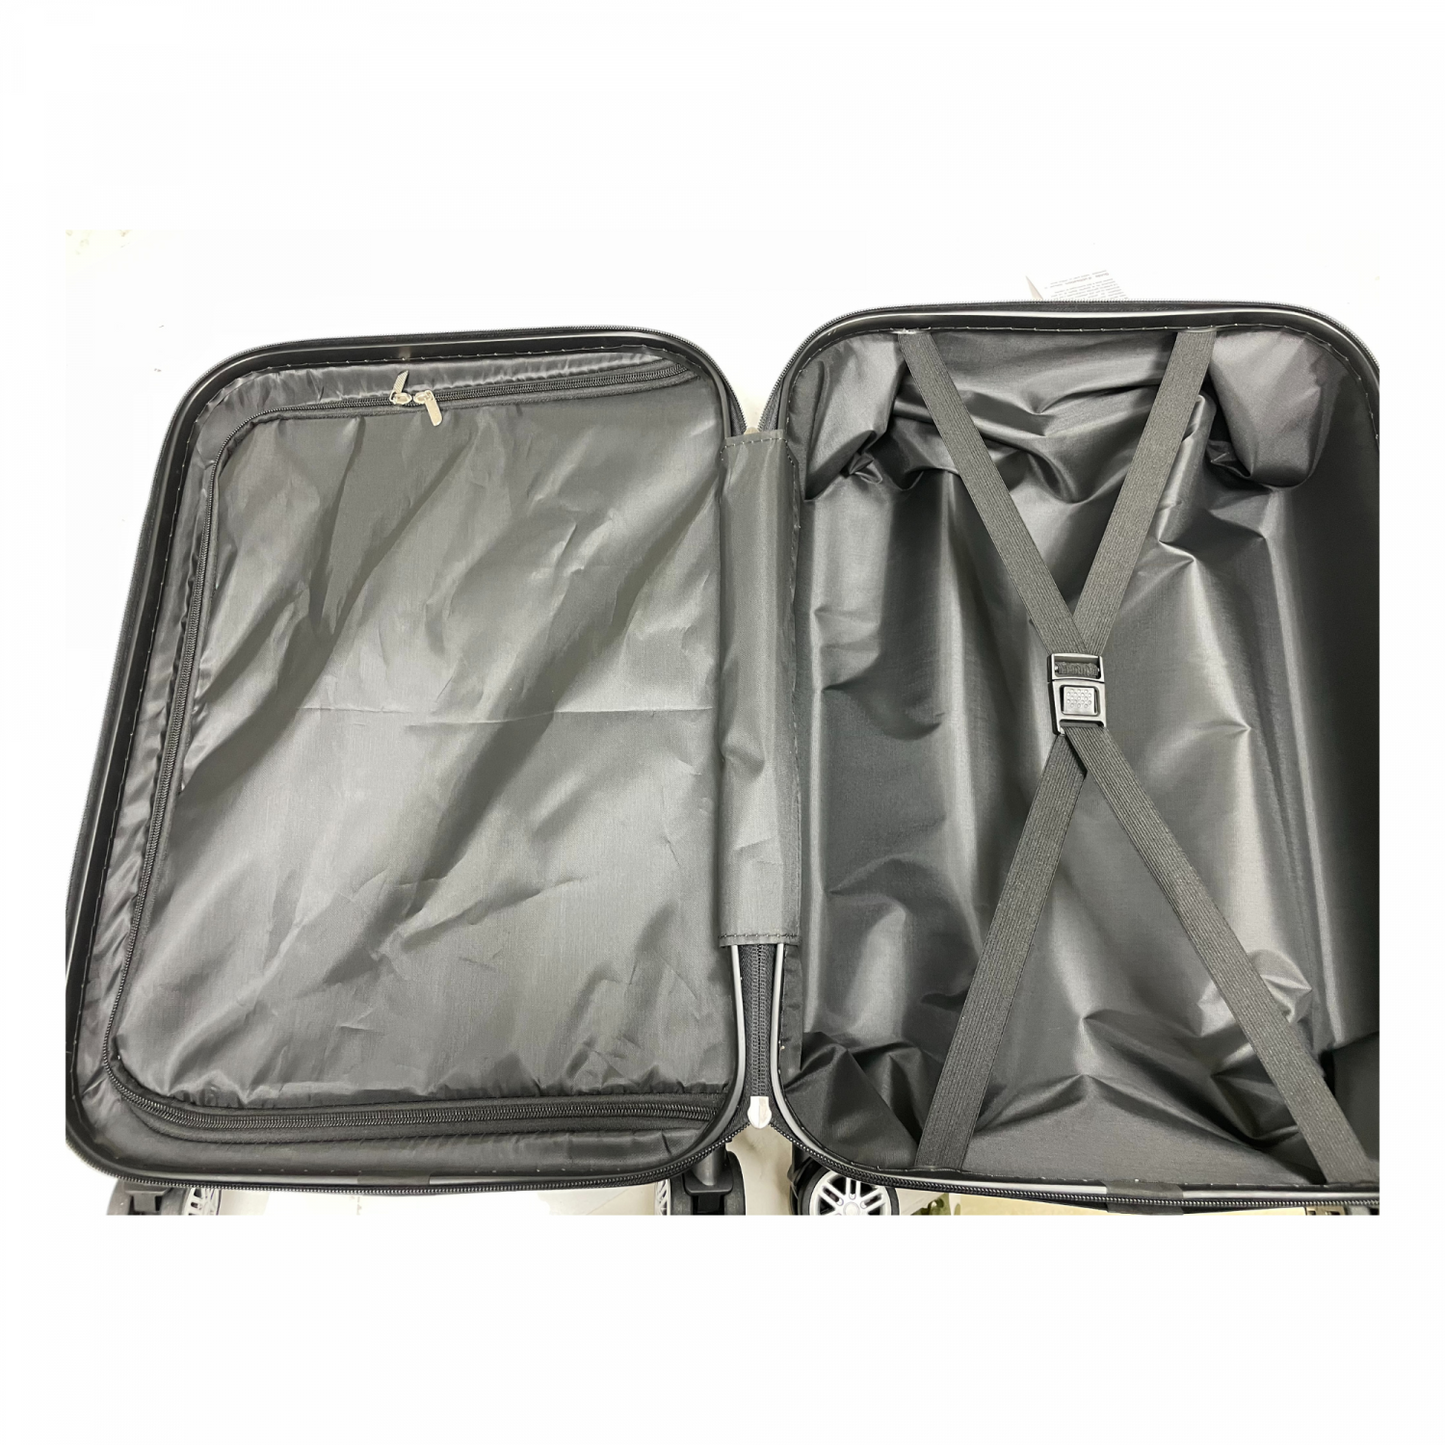 Royalty Line RL-LTS18706: Set of 3 Heavy-Duty Travel Suitcases Black